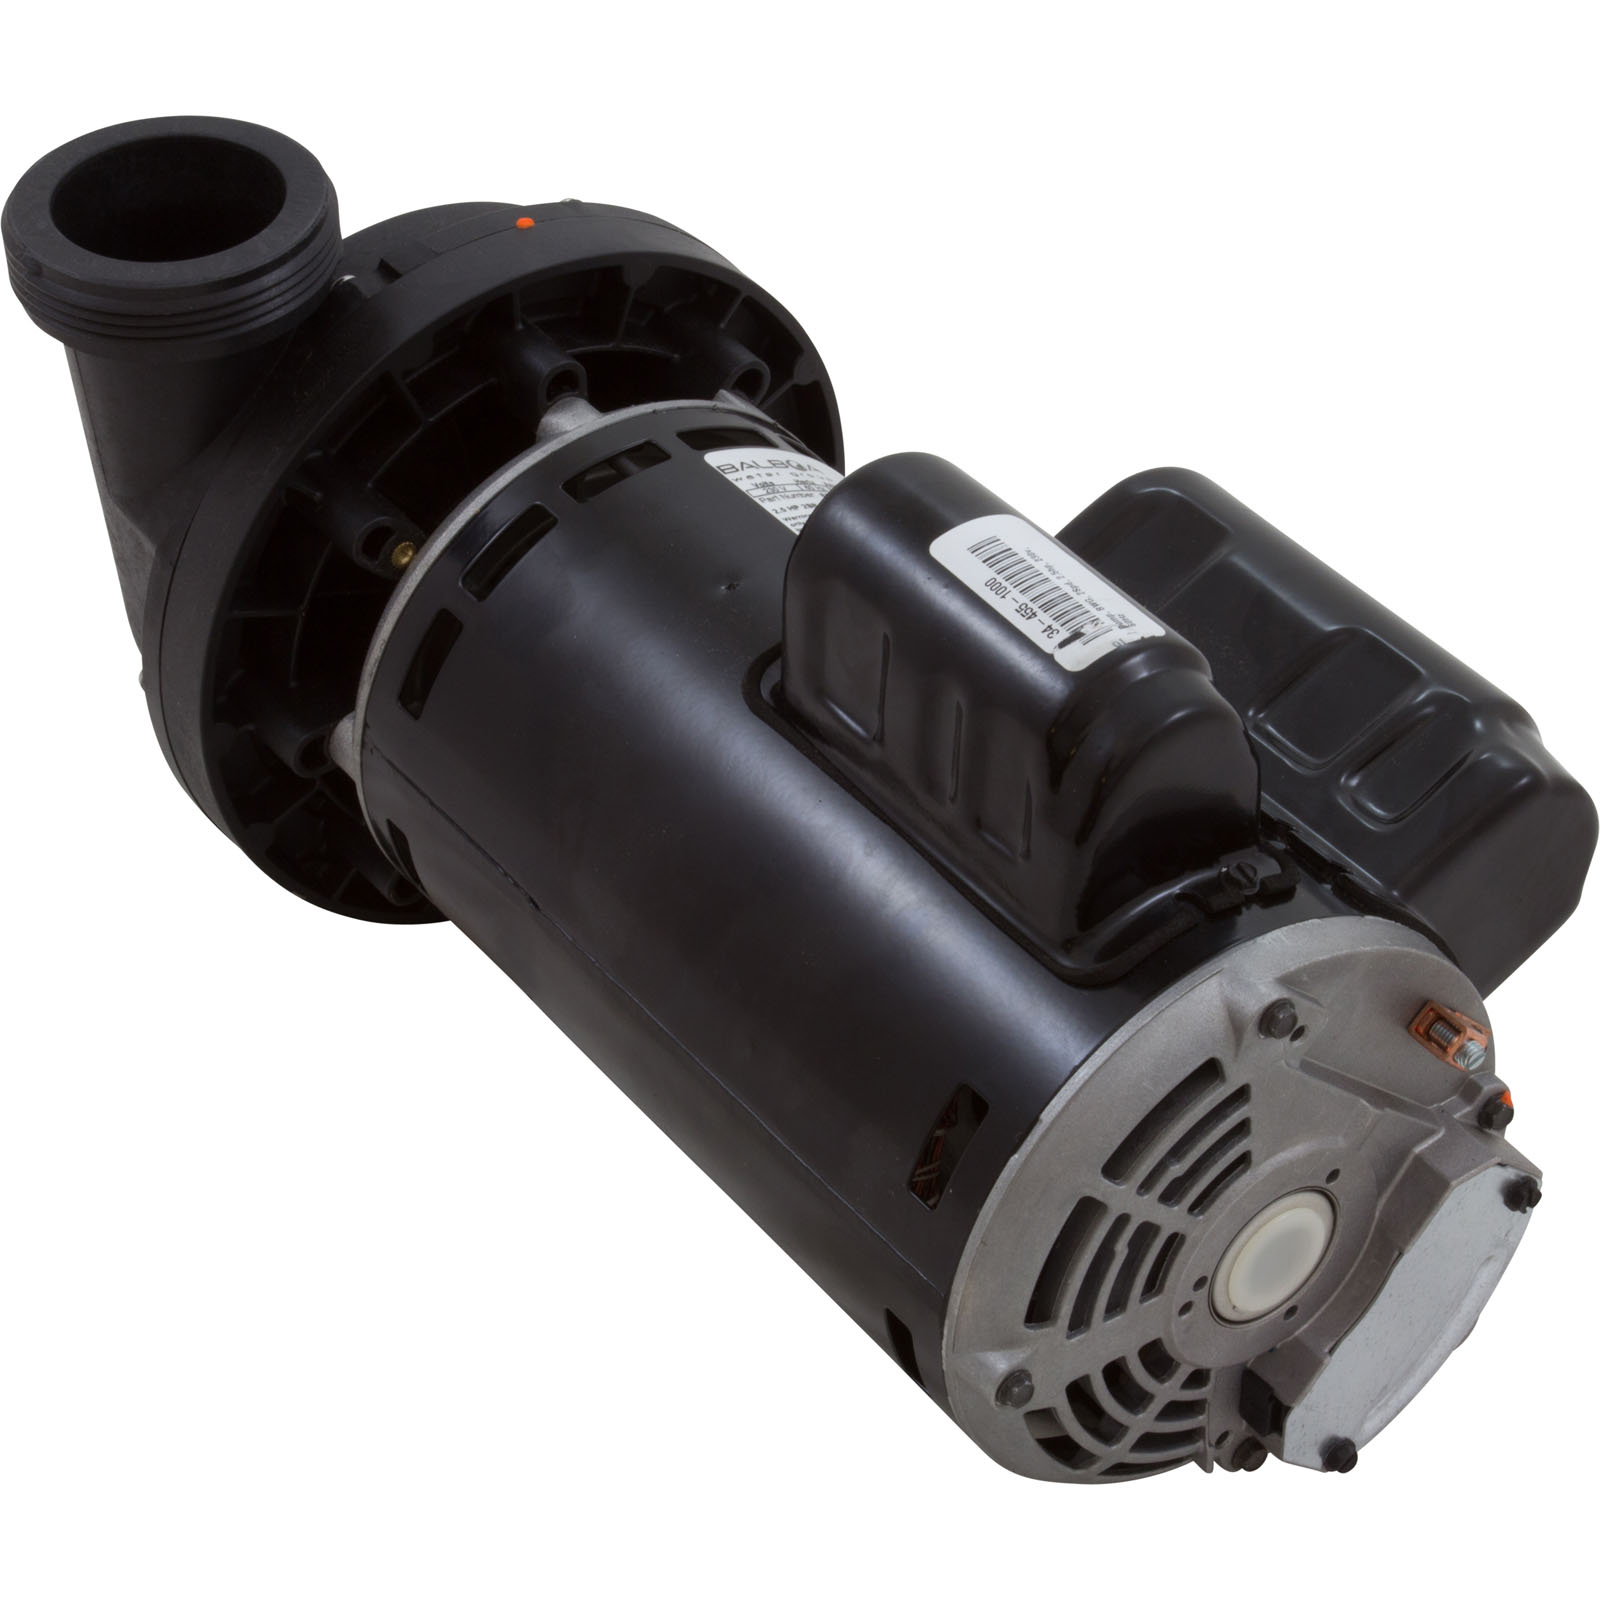 Picture of 6500-343  Replacment Genirc  Spa Pump  2-Spd 2.5hp 230v 60Hz OEM  Replaces   6500-343 , 903234